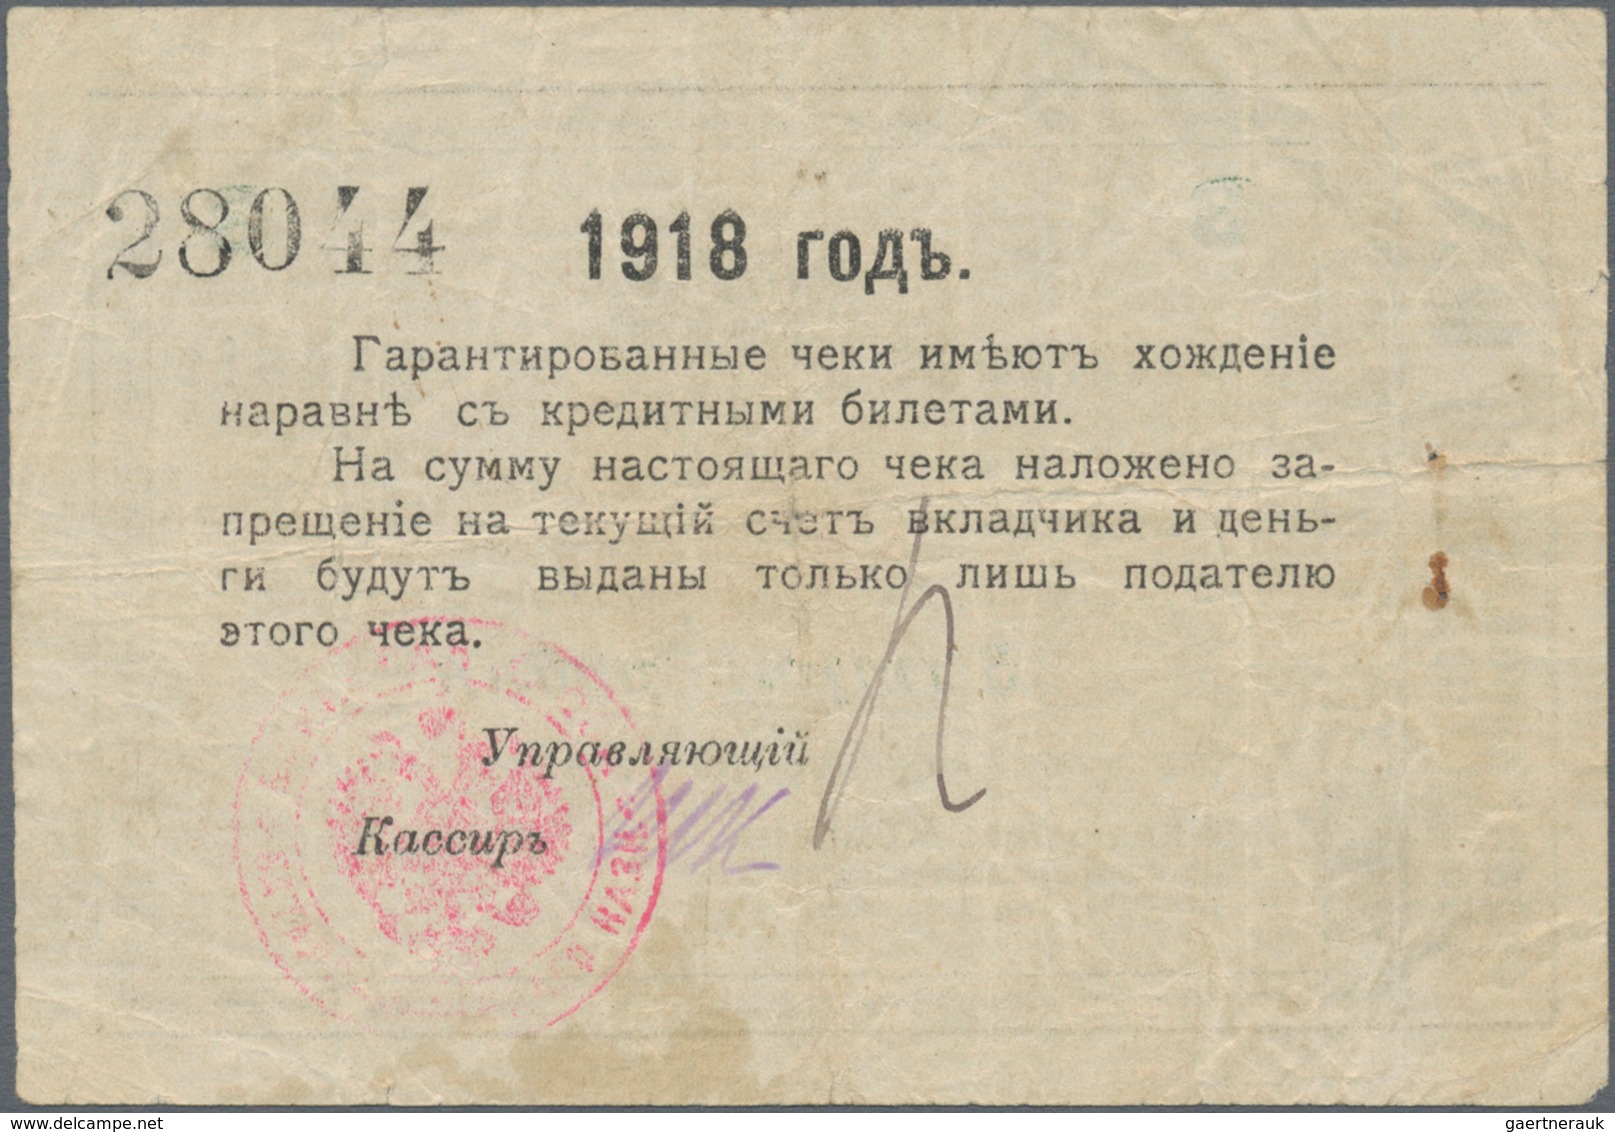 Russia / Russland: North Caucasus, State Bank, Kislovodsk Company, Independent Army, 3 Rubles 1918, - Rusia